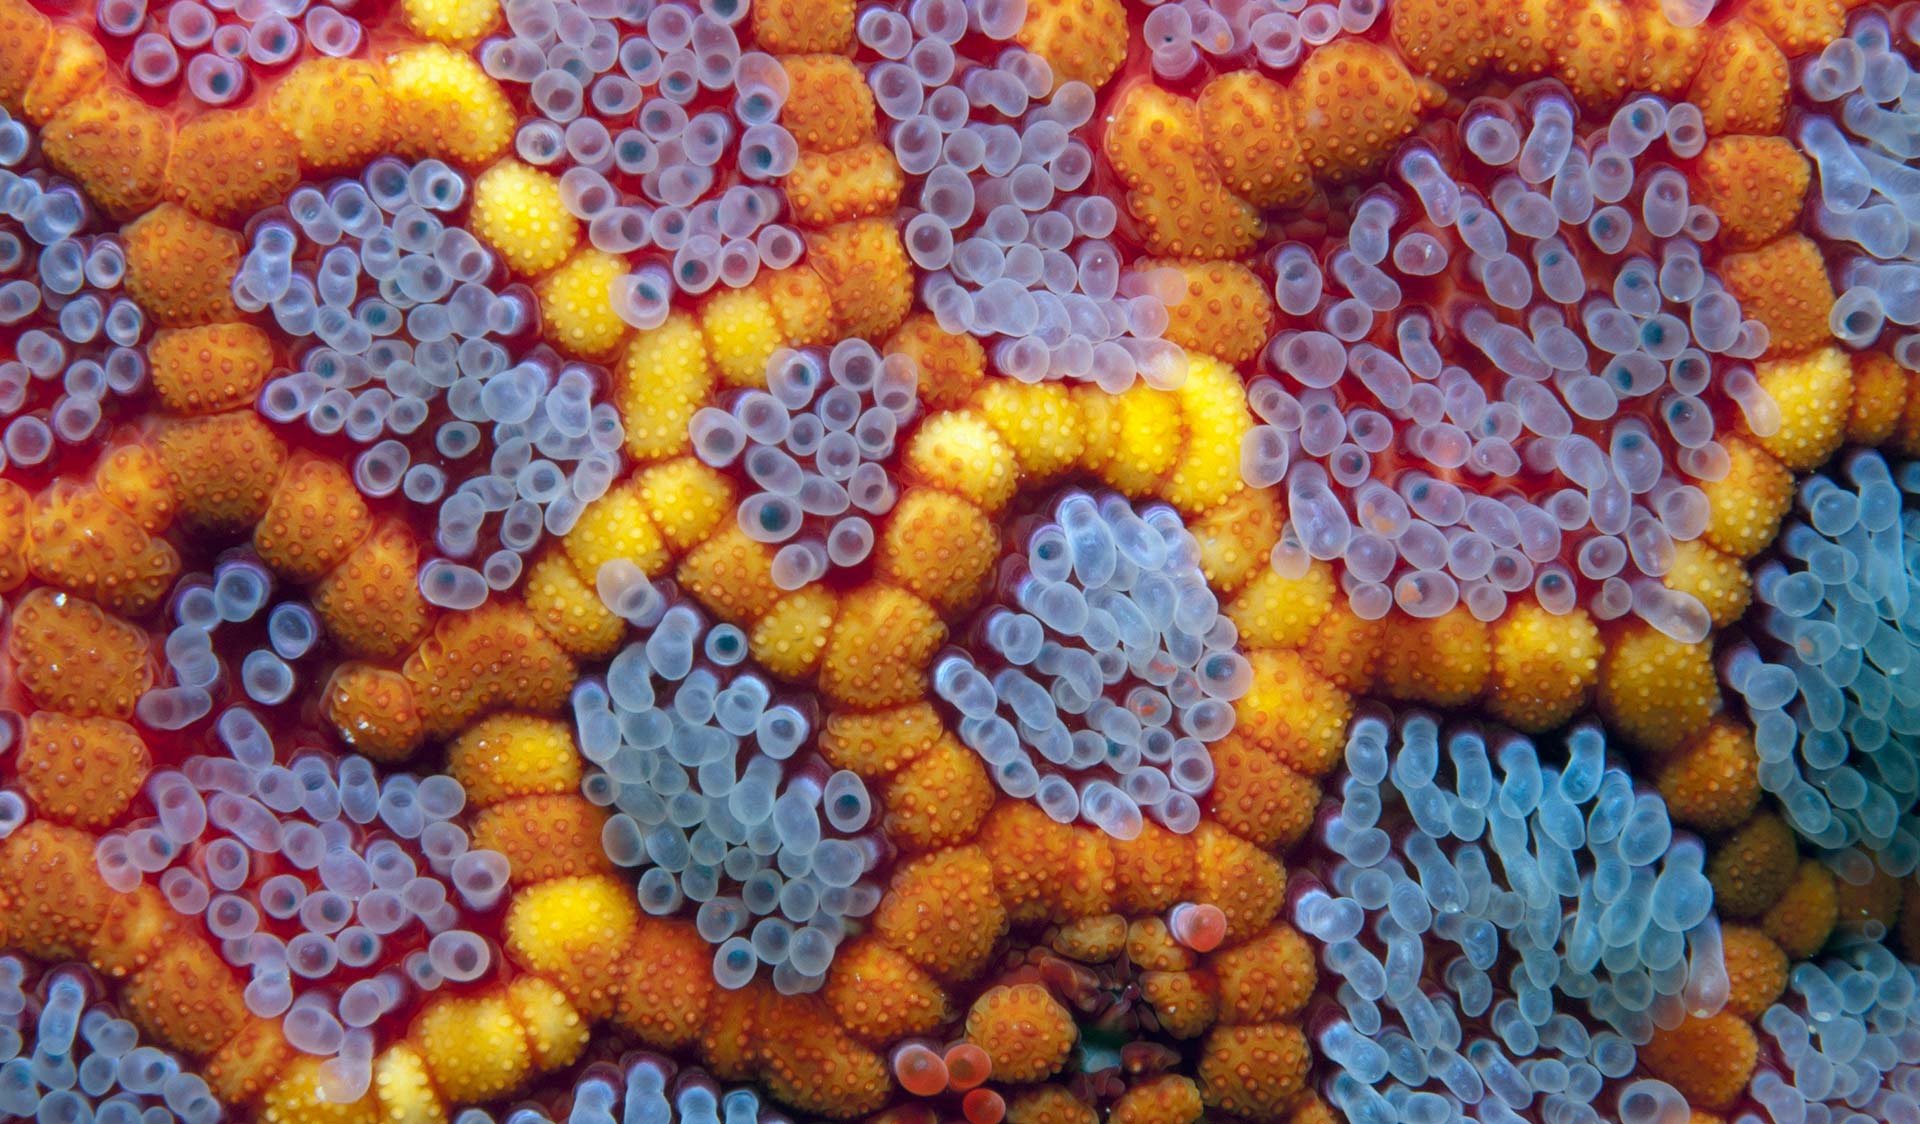 A magnified photo of coral in the Wilsons Promontory Marine National Park.